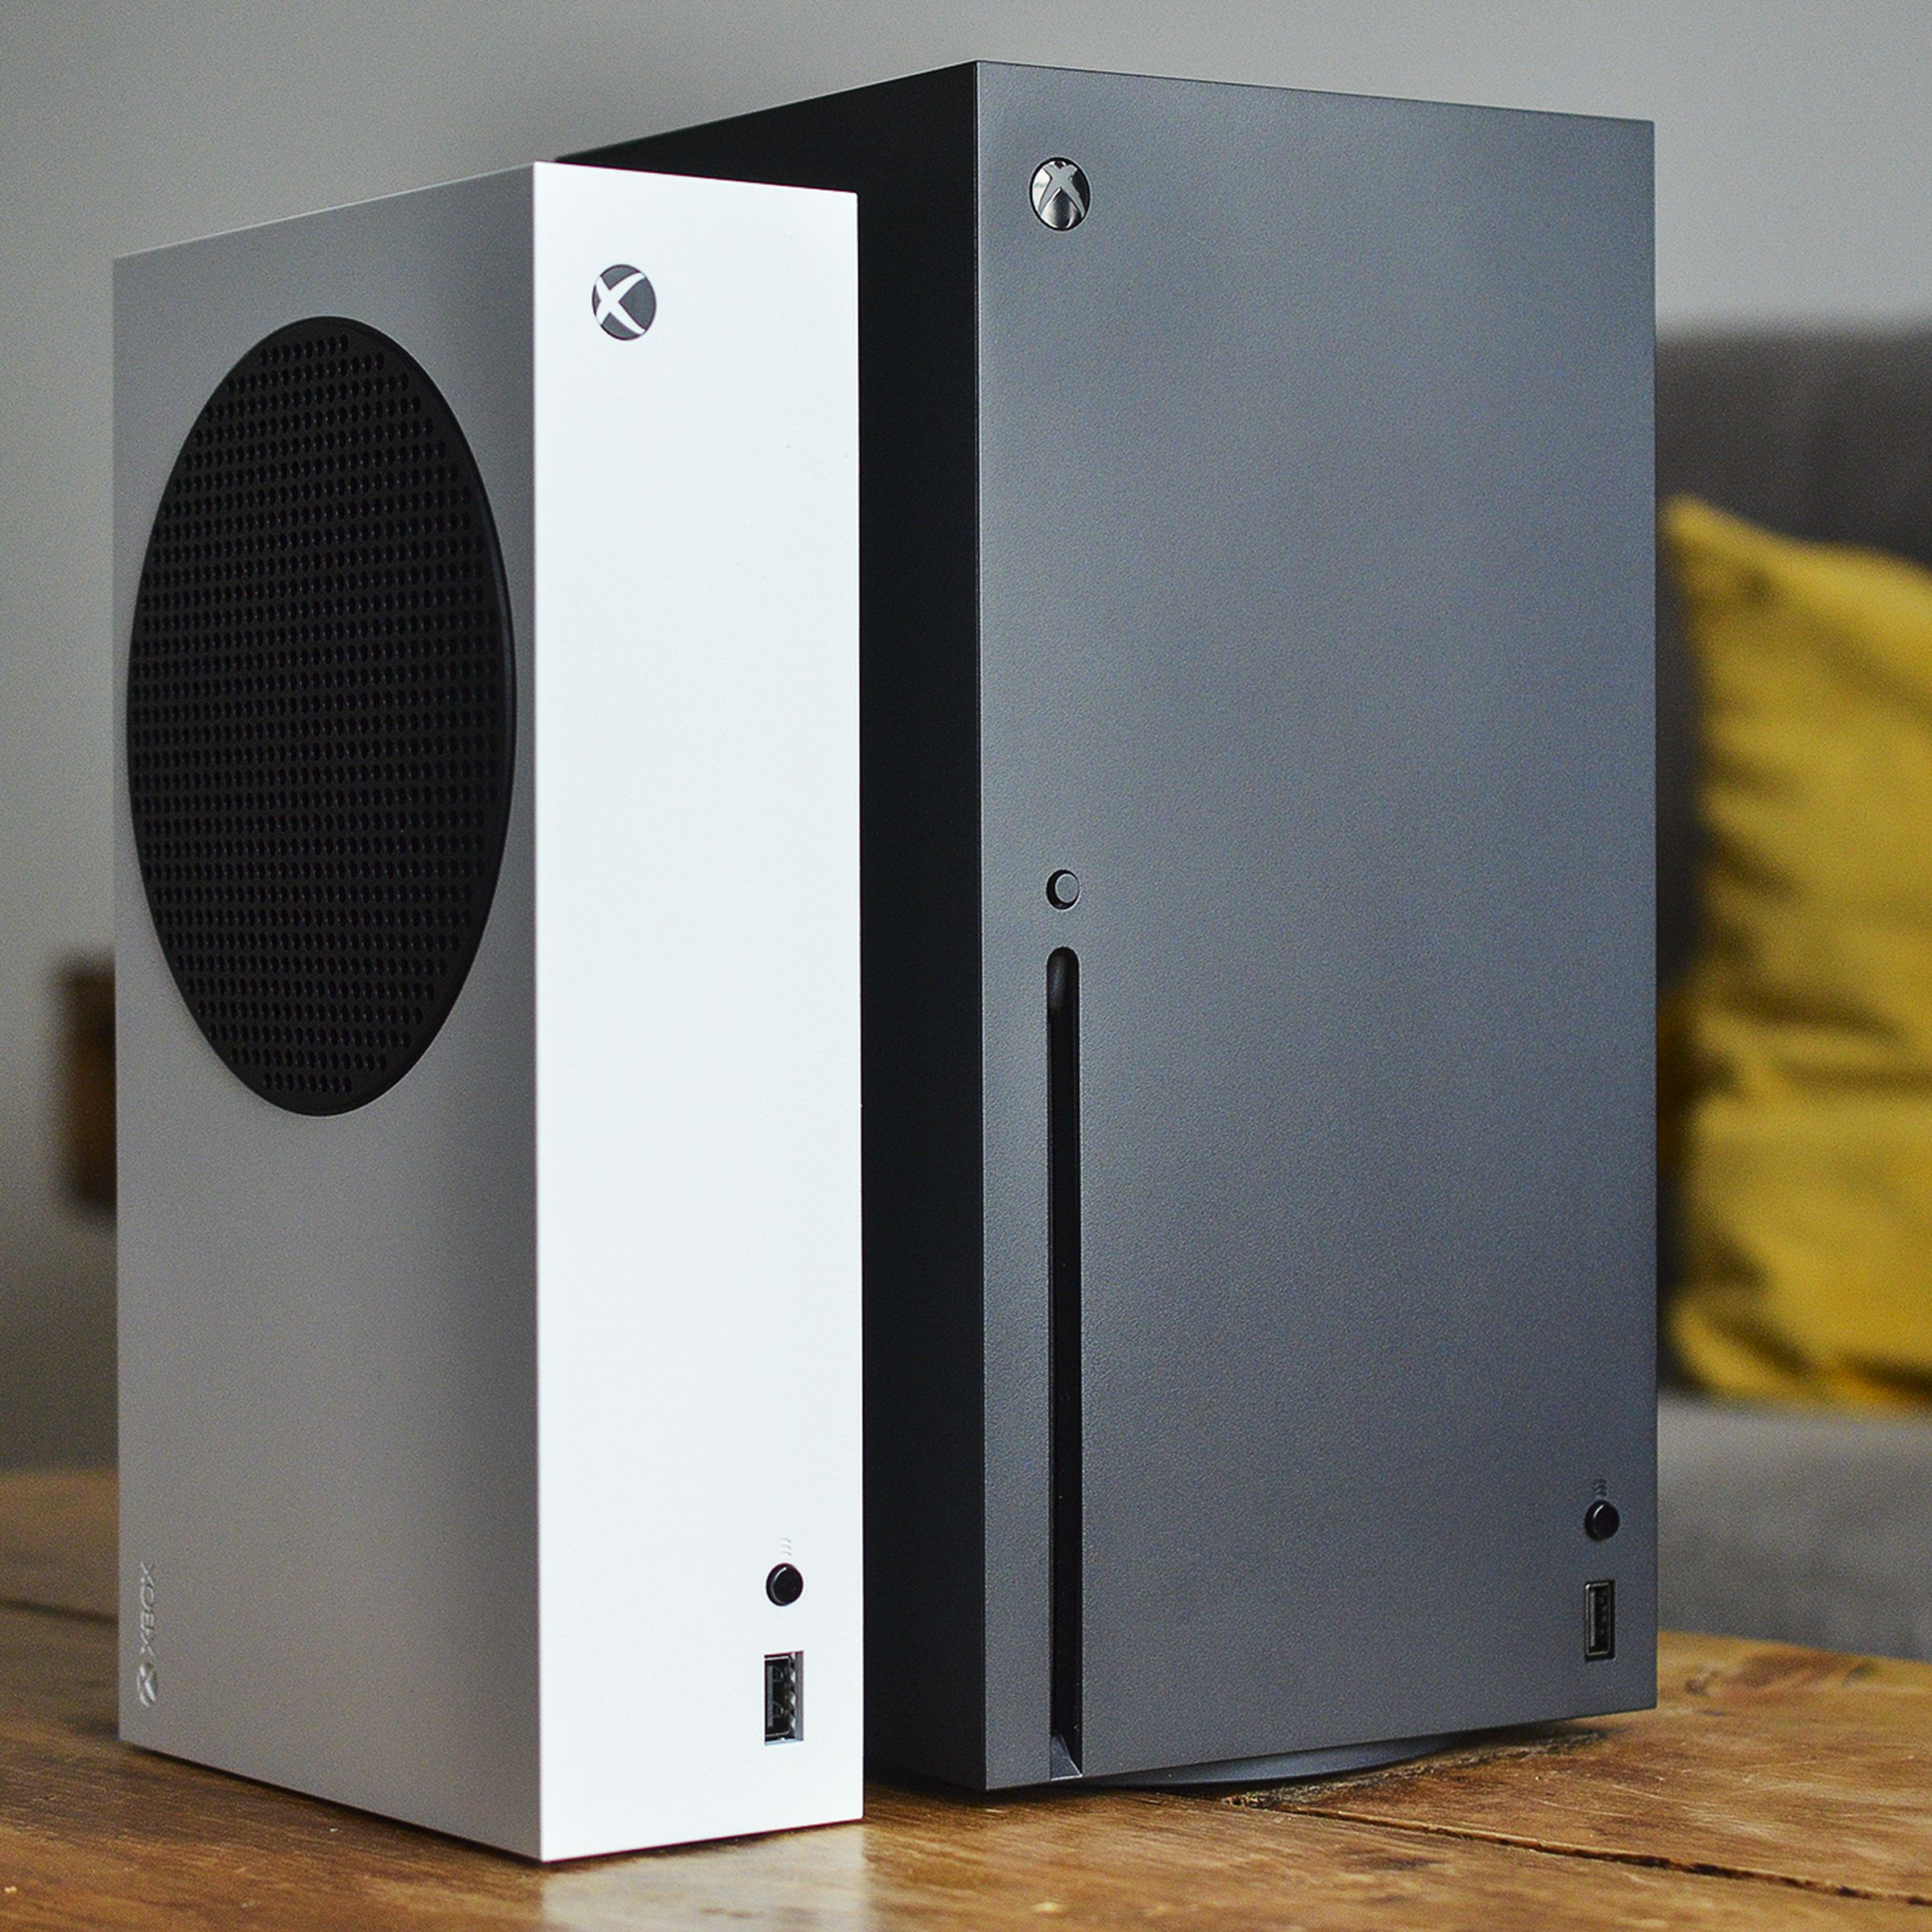 Microsoft’s white Xbox Series S sits alongside a bigger black Xbox Series X on a wooden coffee table in a living room